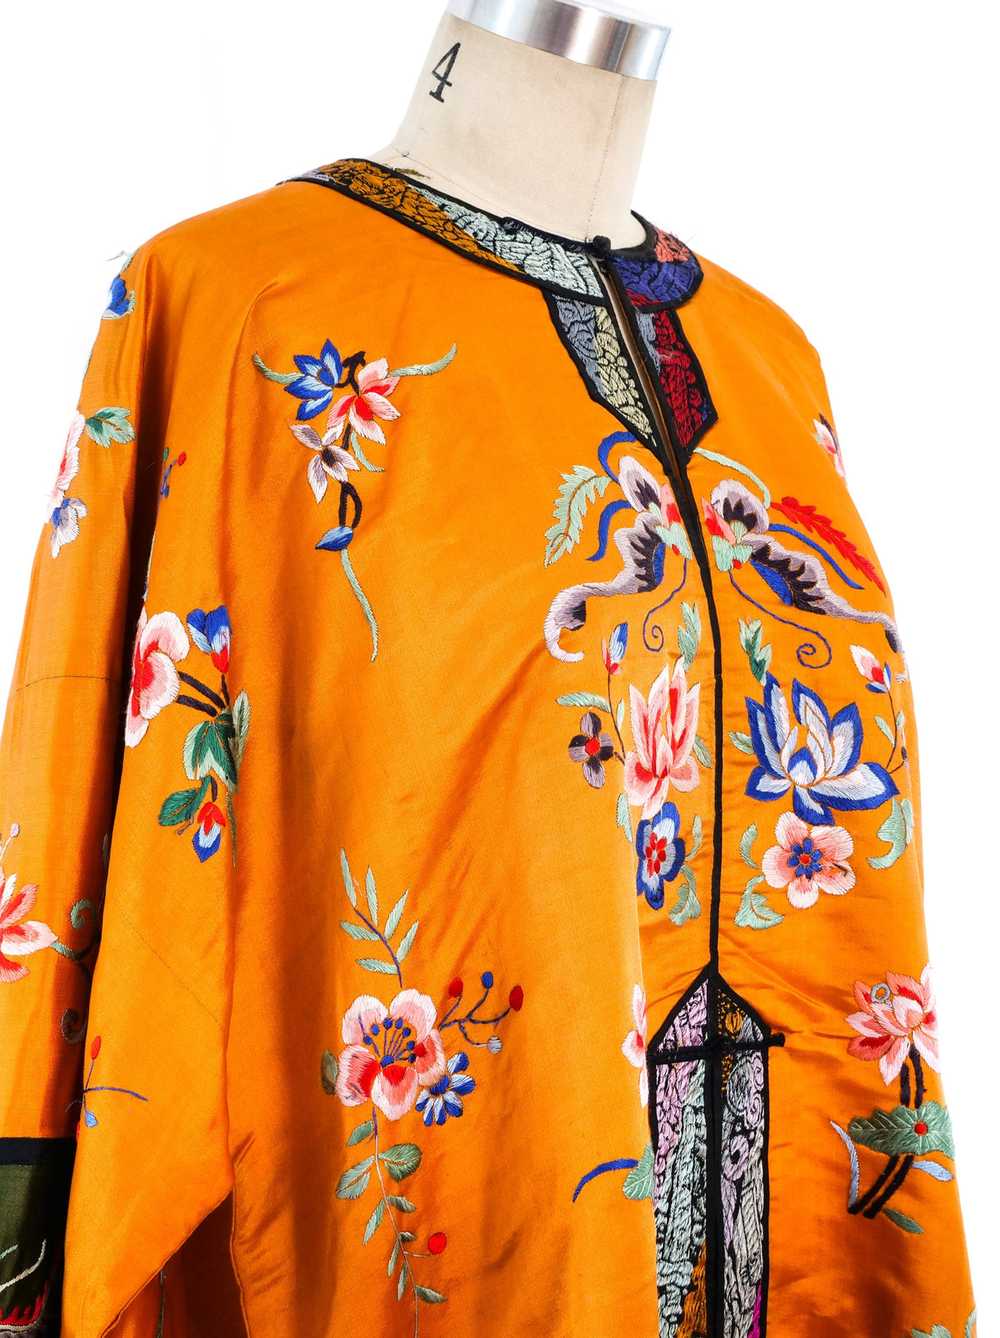 Embroidered Silk Chinese Jacket - image 5